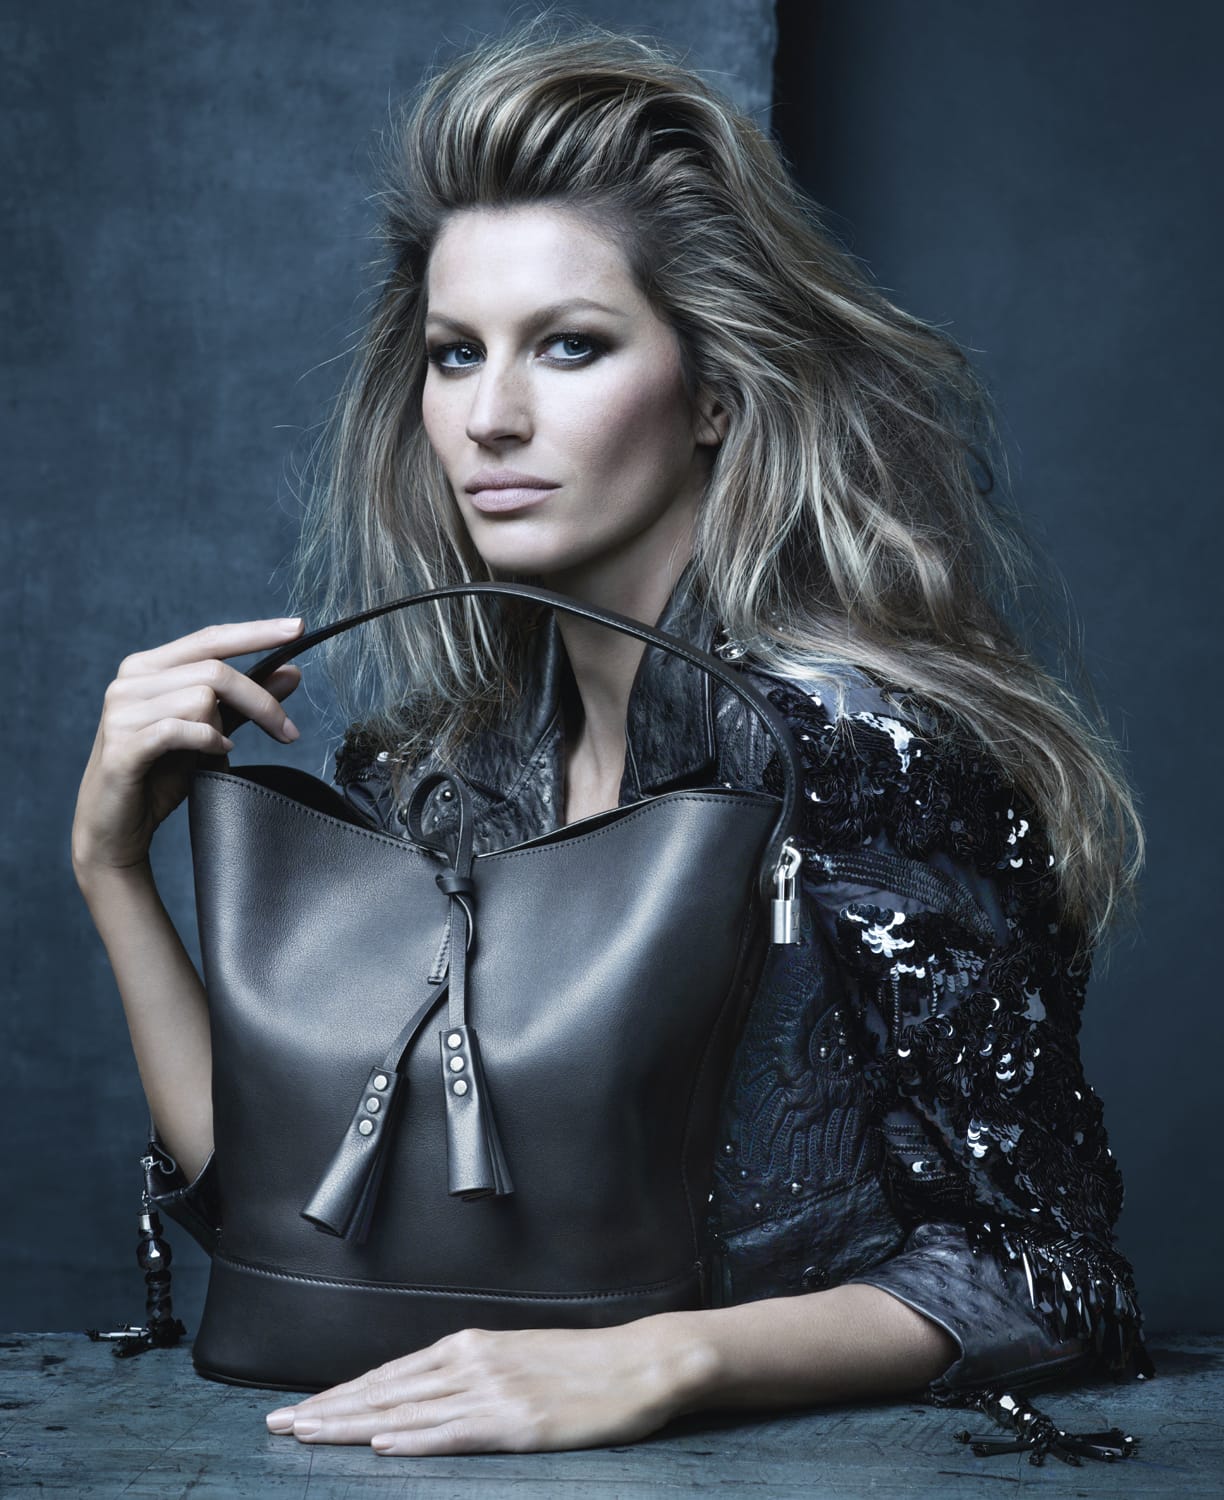 Gisele Bündchen goes topless for Louis Vuitton in new campaign